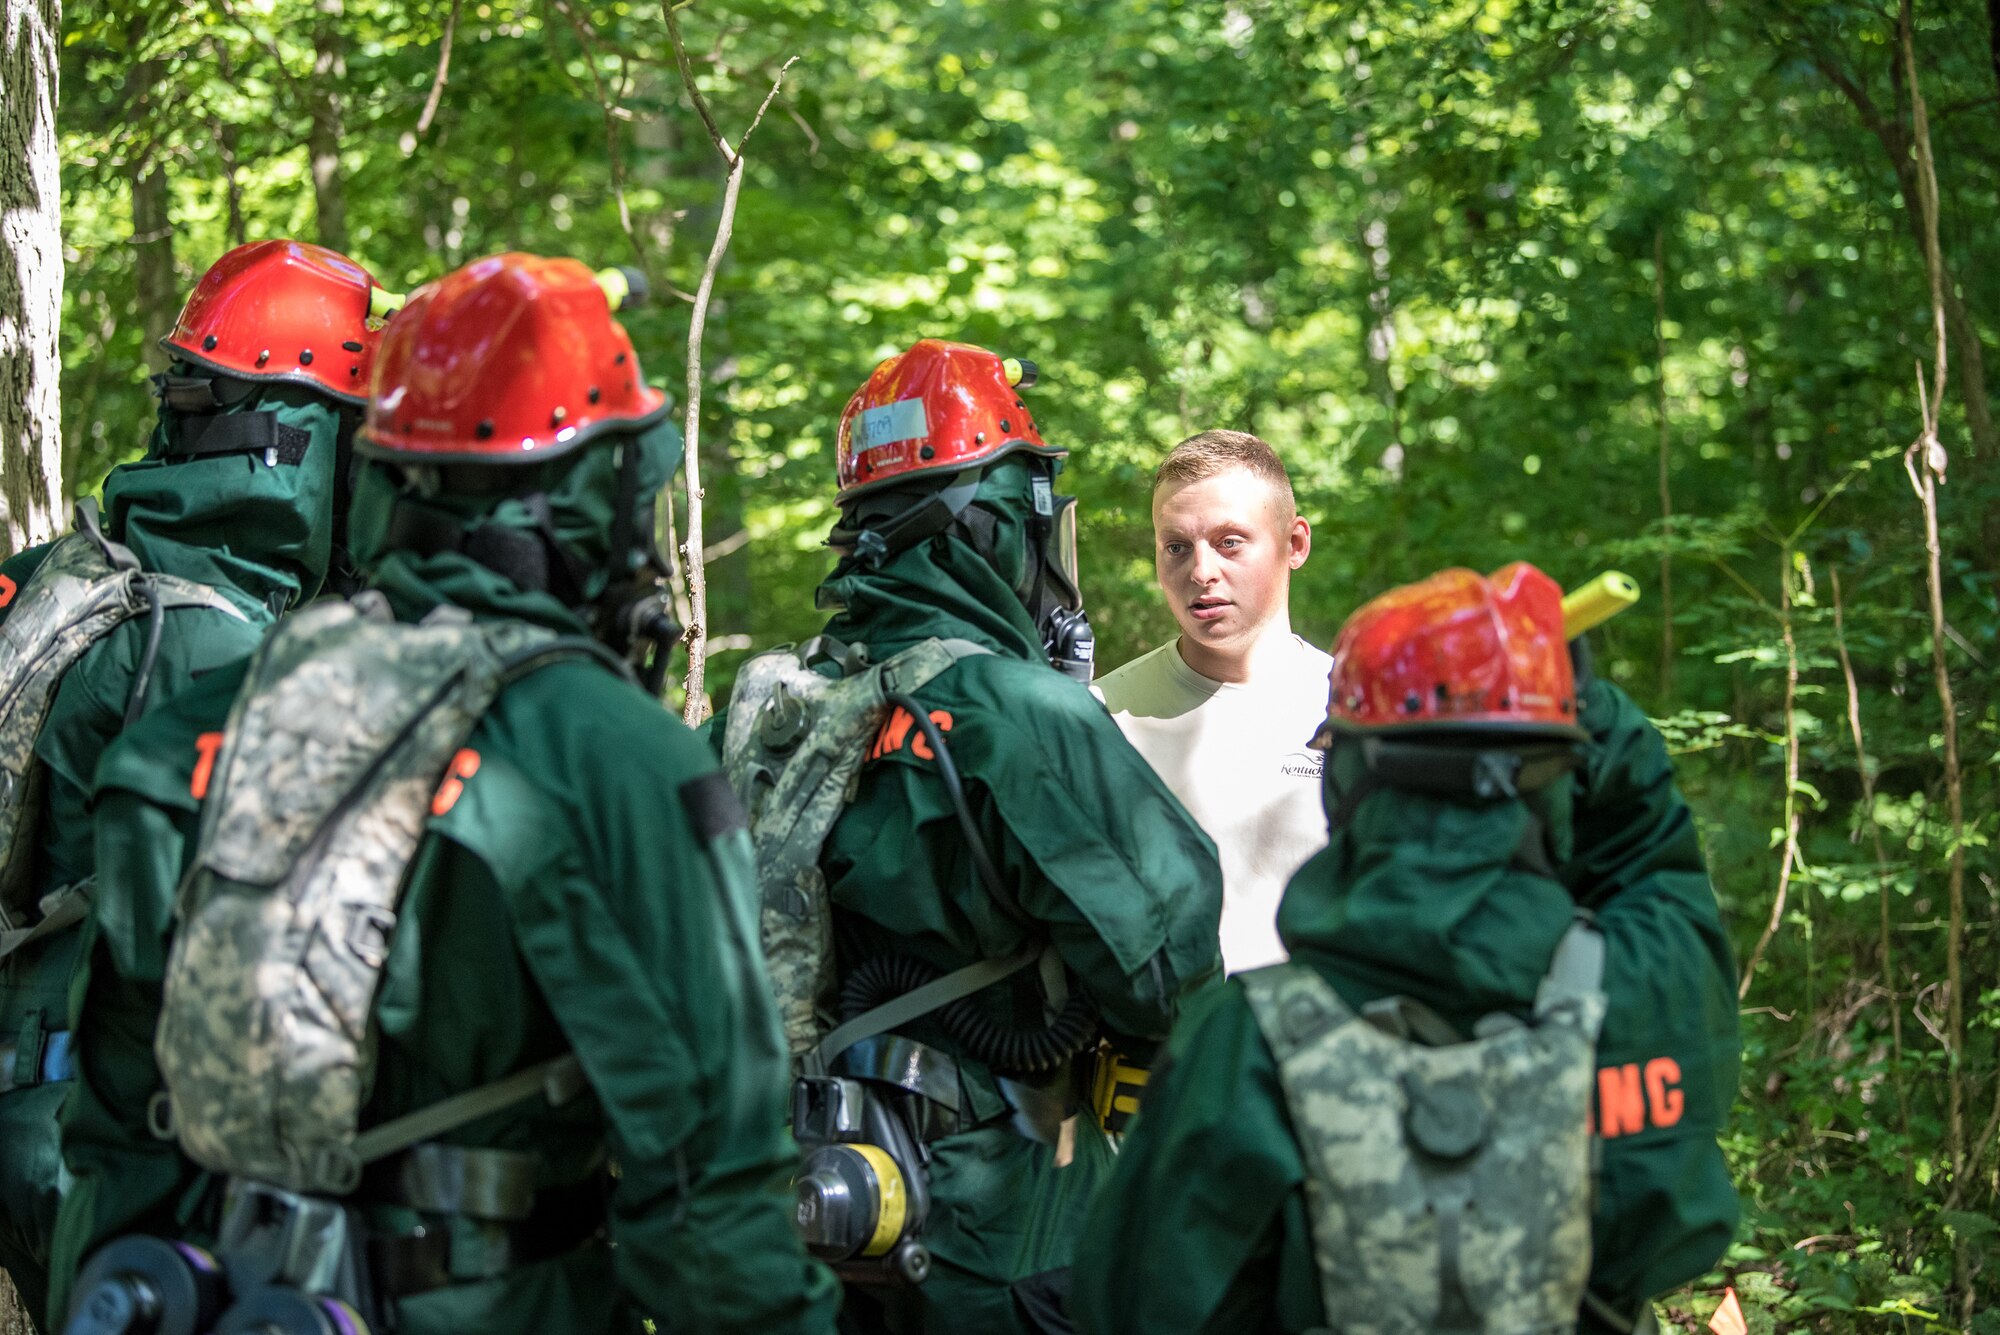 Senior Airman Parker Hale, a member of the Kentucky Air National Guard's Fatality Search and Recovery Team, briefs FSRT members before a training exercise at Rough River State Resort Park in Falls of Rough, Ky., on July 18, 2018. Thirteen members of the 123rd Airlift Wing participated in the three-day exercise to simulate the recovery and repatriation of fallen service members. (U.S. Air National Guard photo by Master Sgt. Phil Speck)